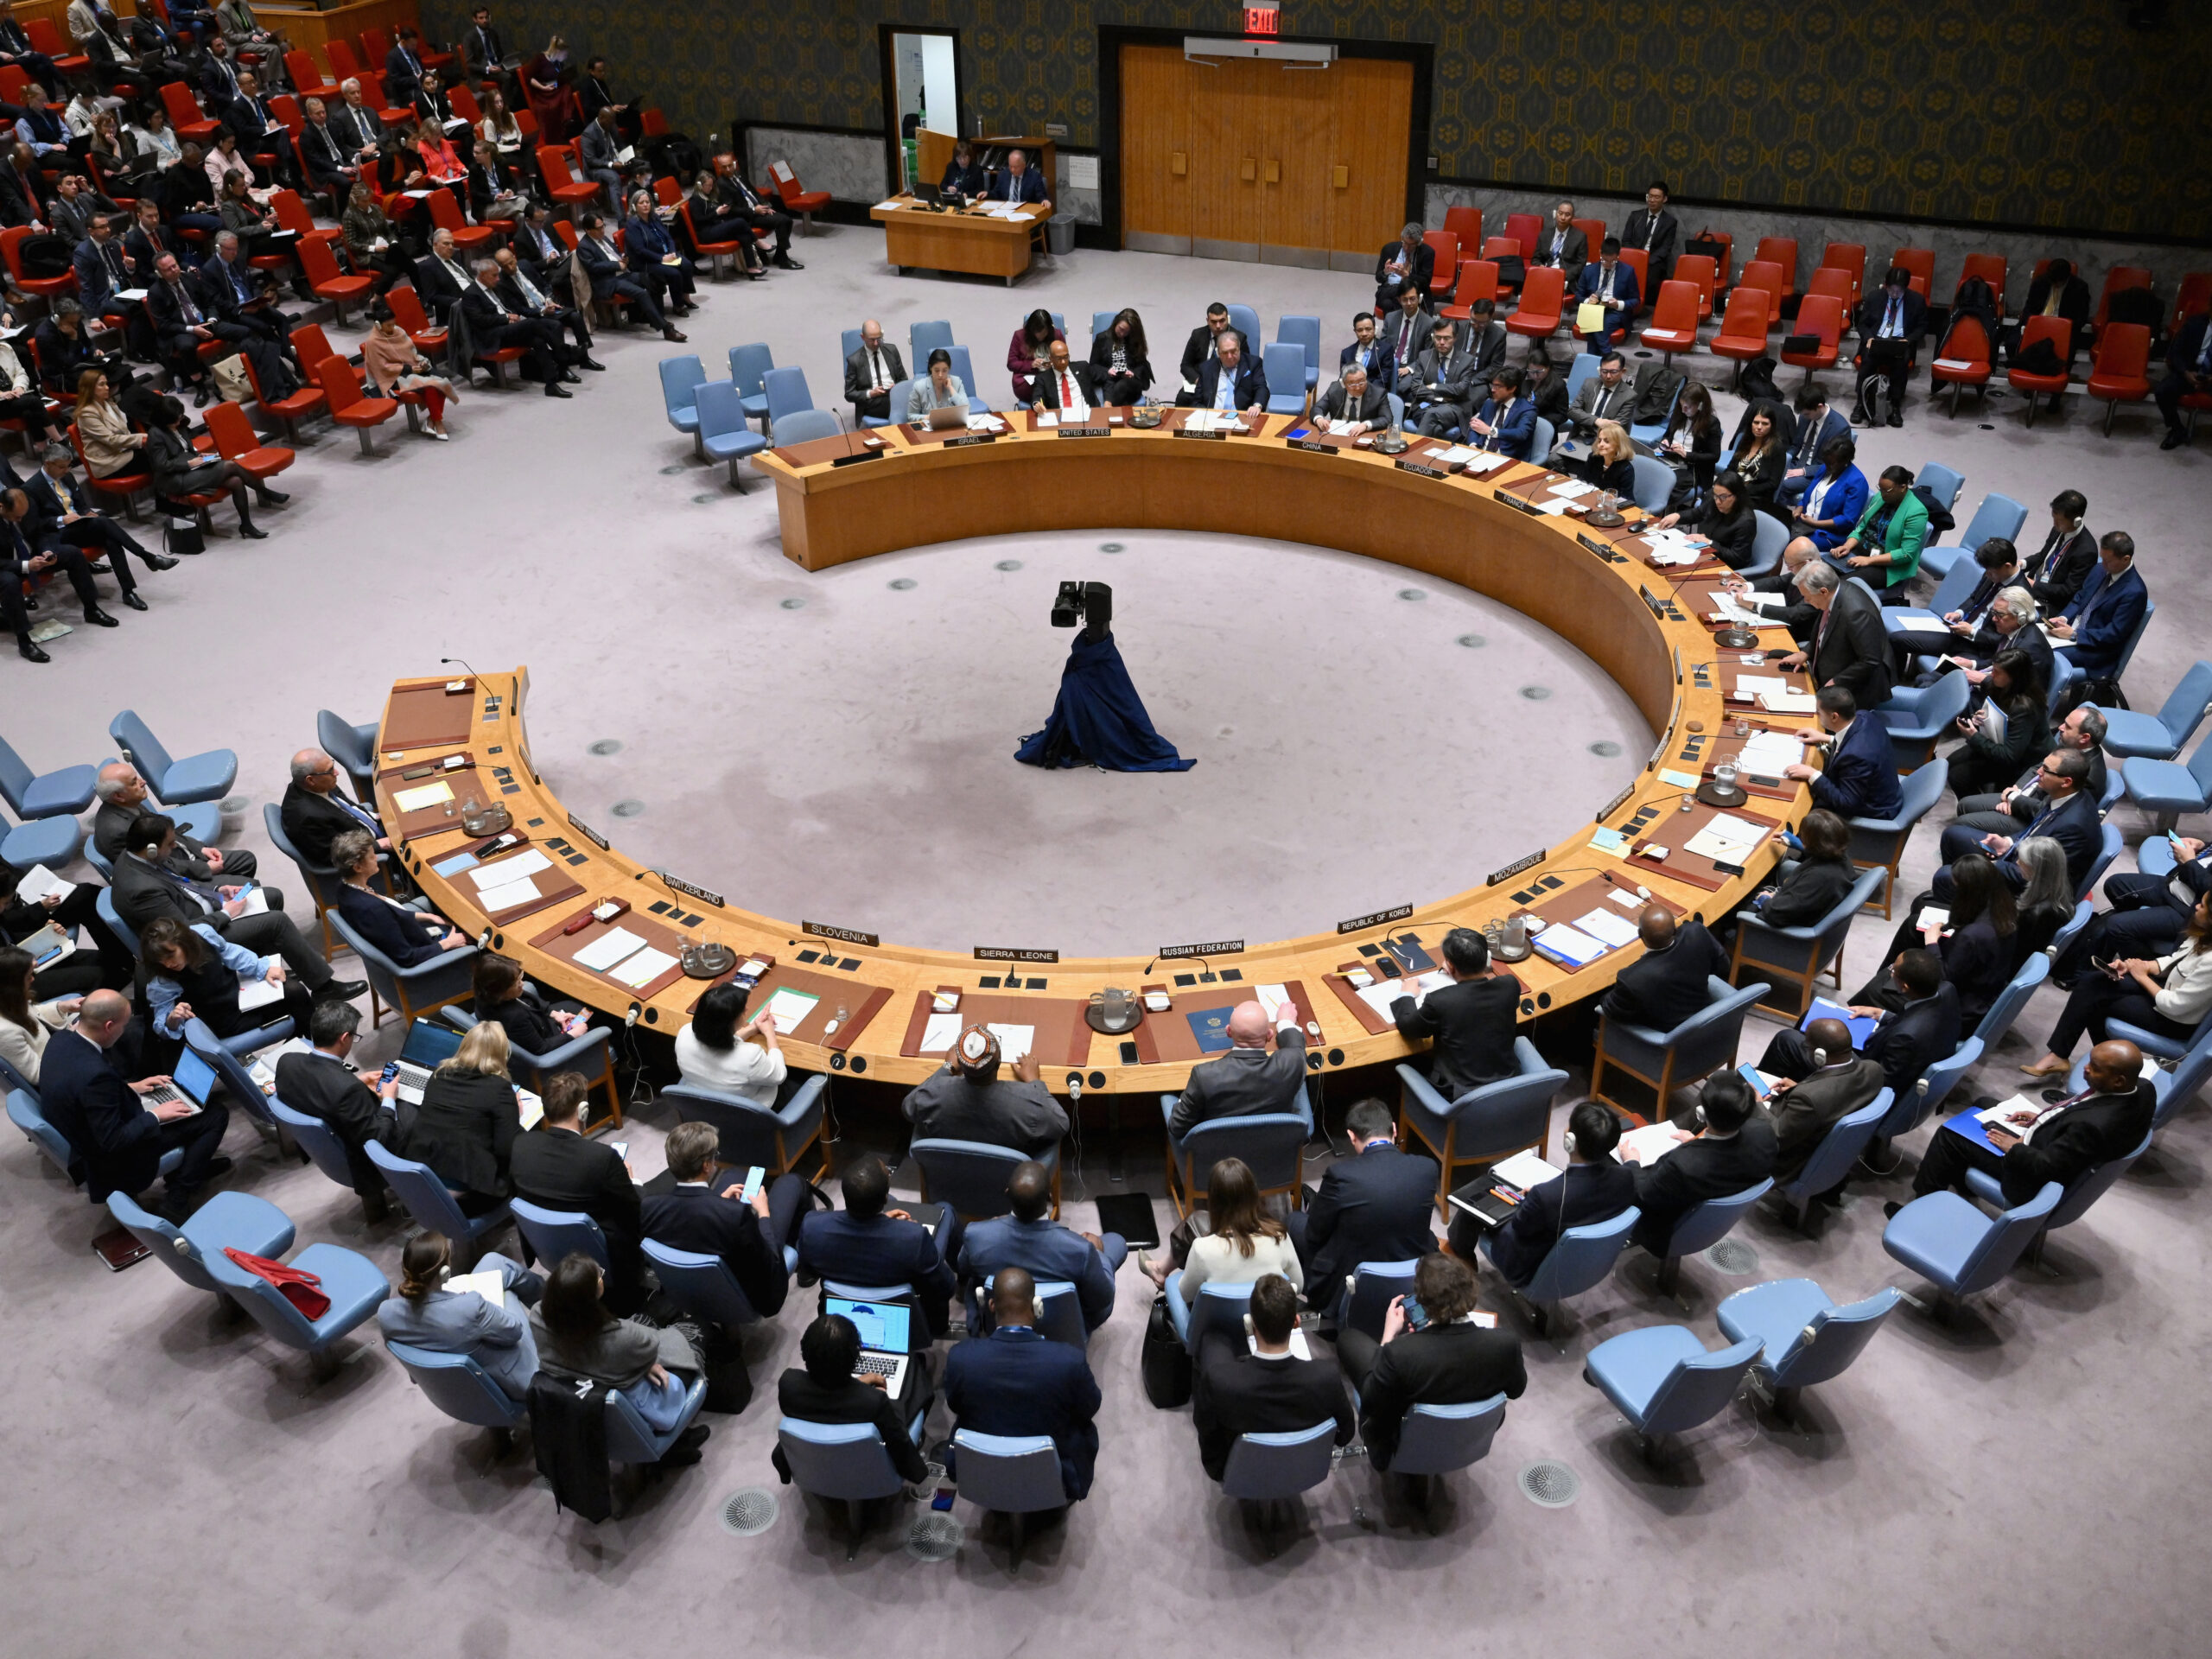 The United Nations Security Council met Thursday to debate whether the U.N. should admit the State of Palestine as a full voting member.